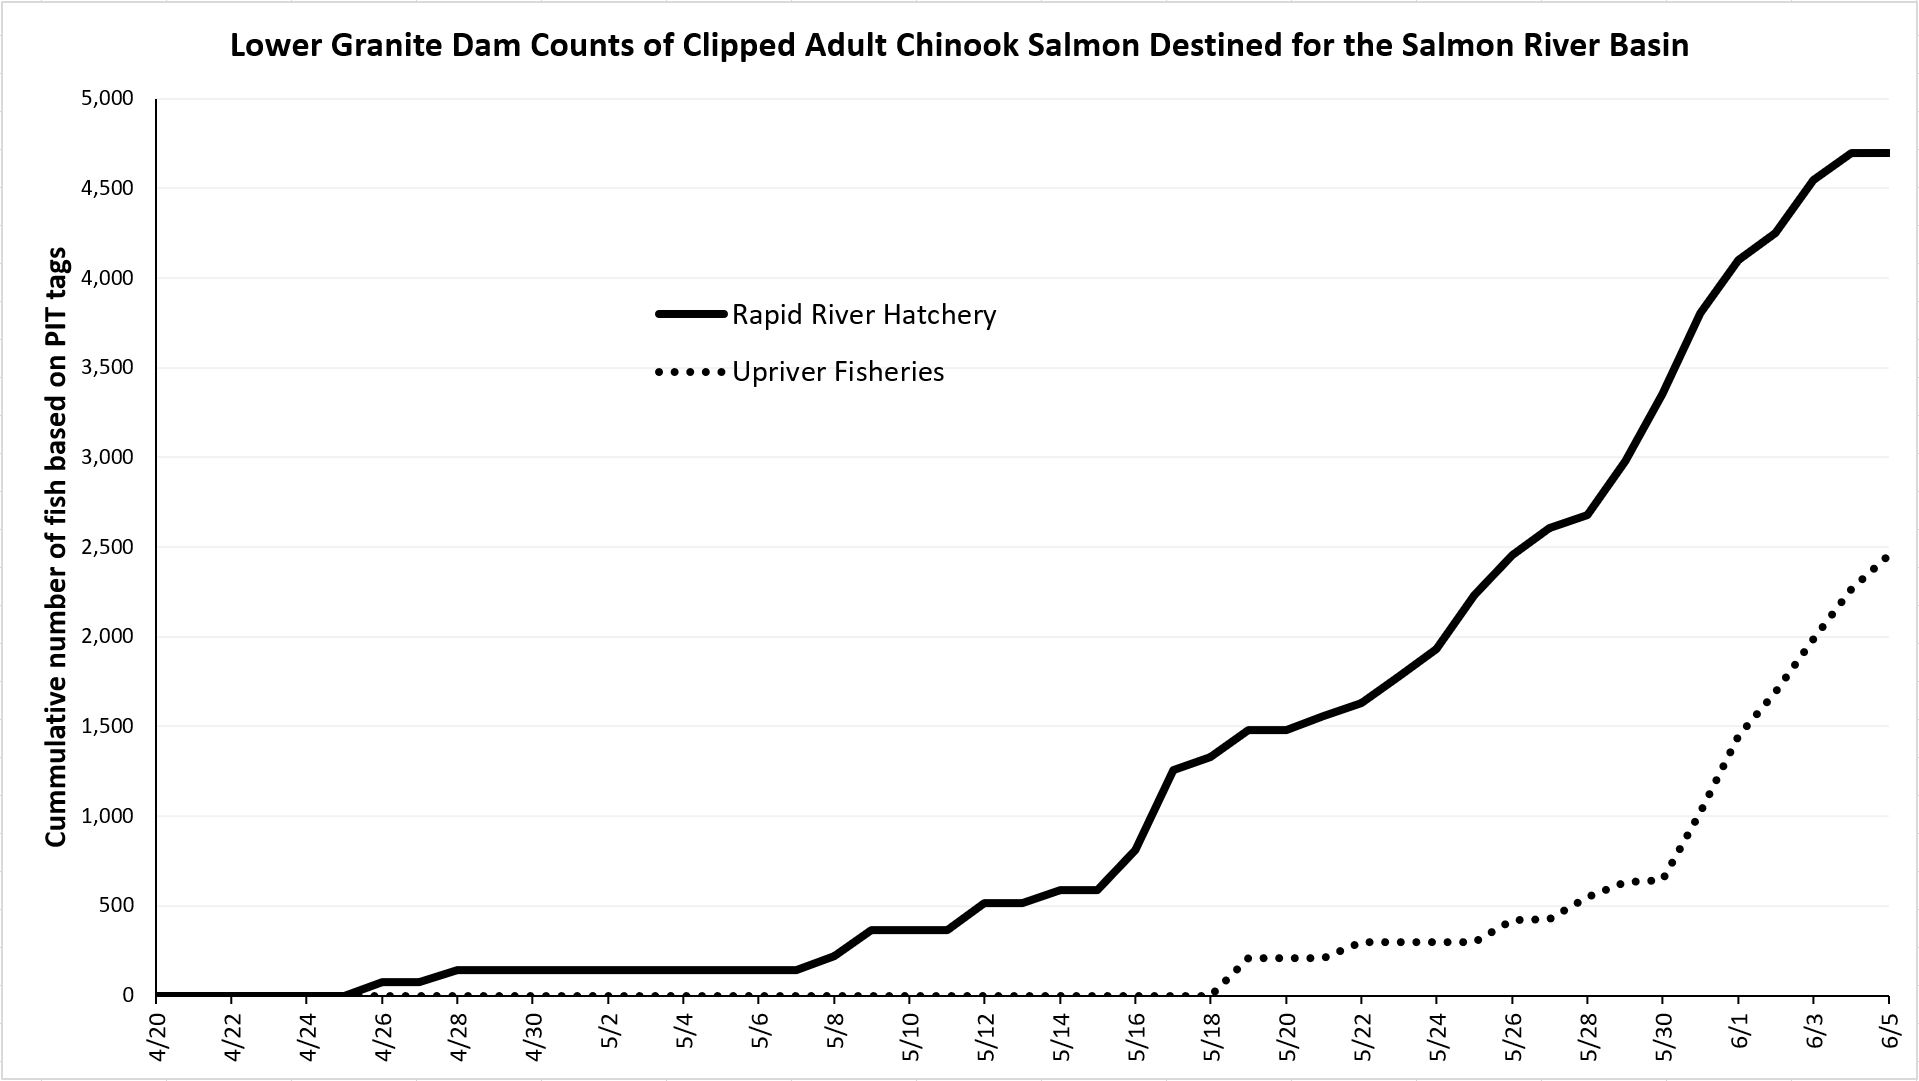 LGD cumulative counts for Salmon River bound hatchery fish